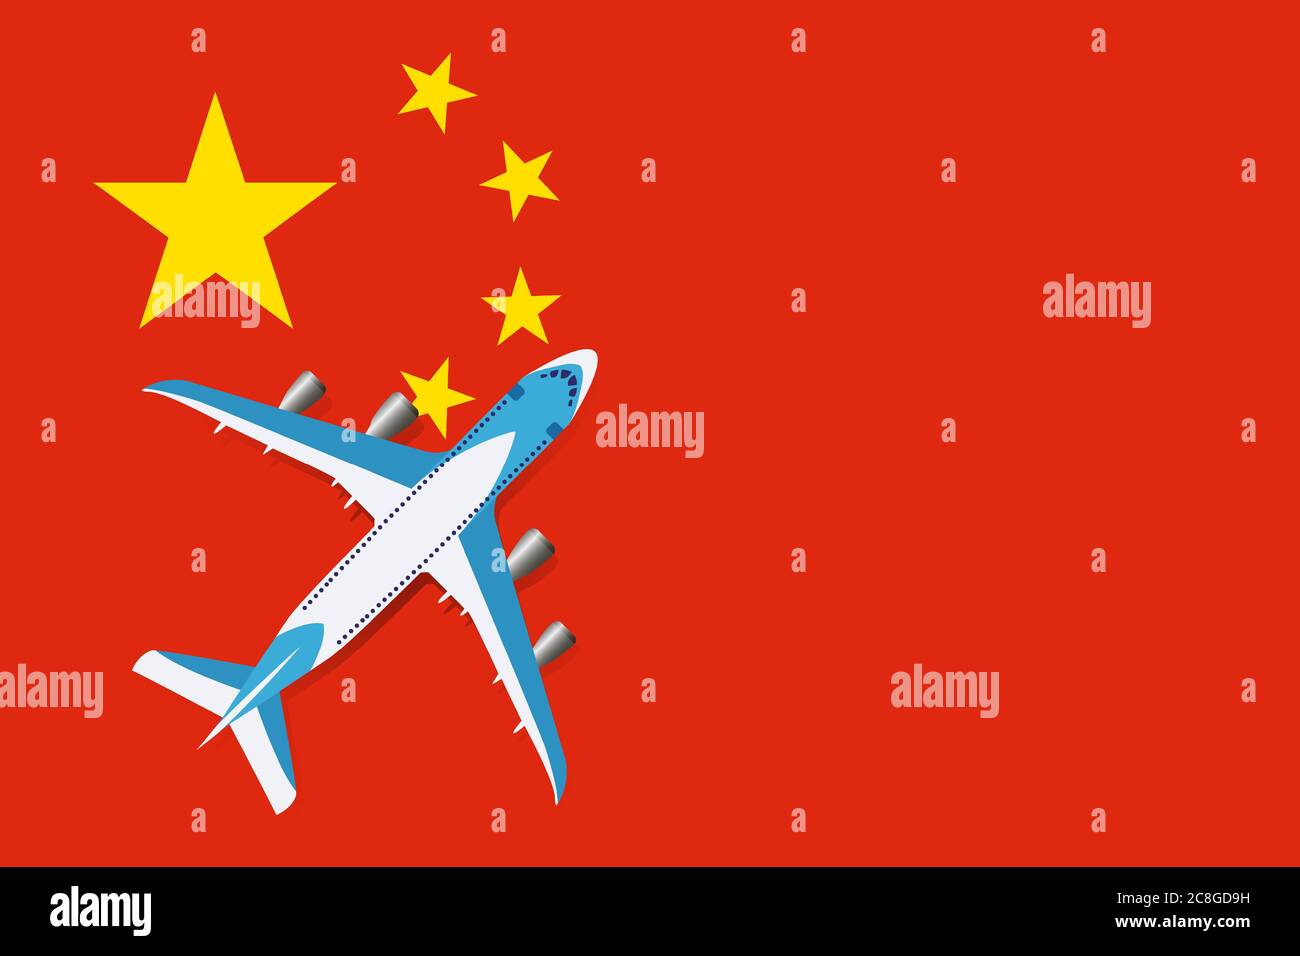 Air china plane Stock Vector Images - Alamy